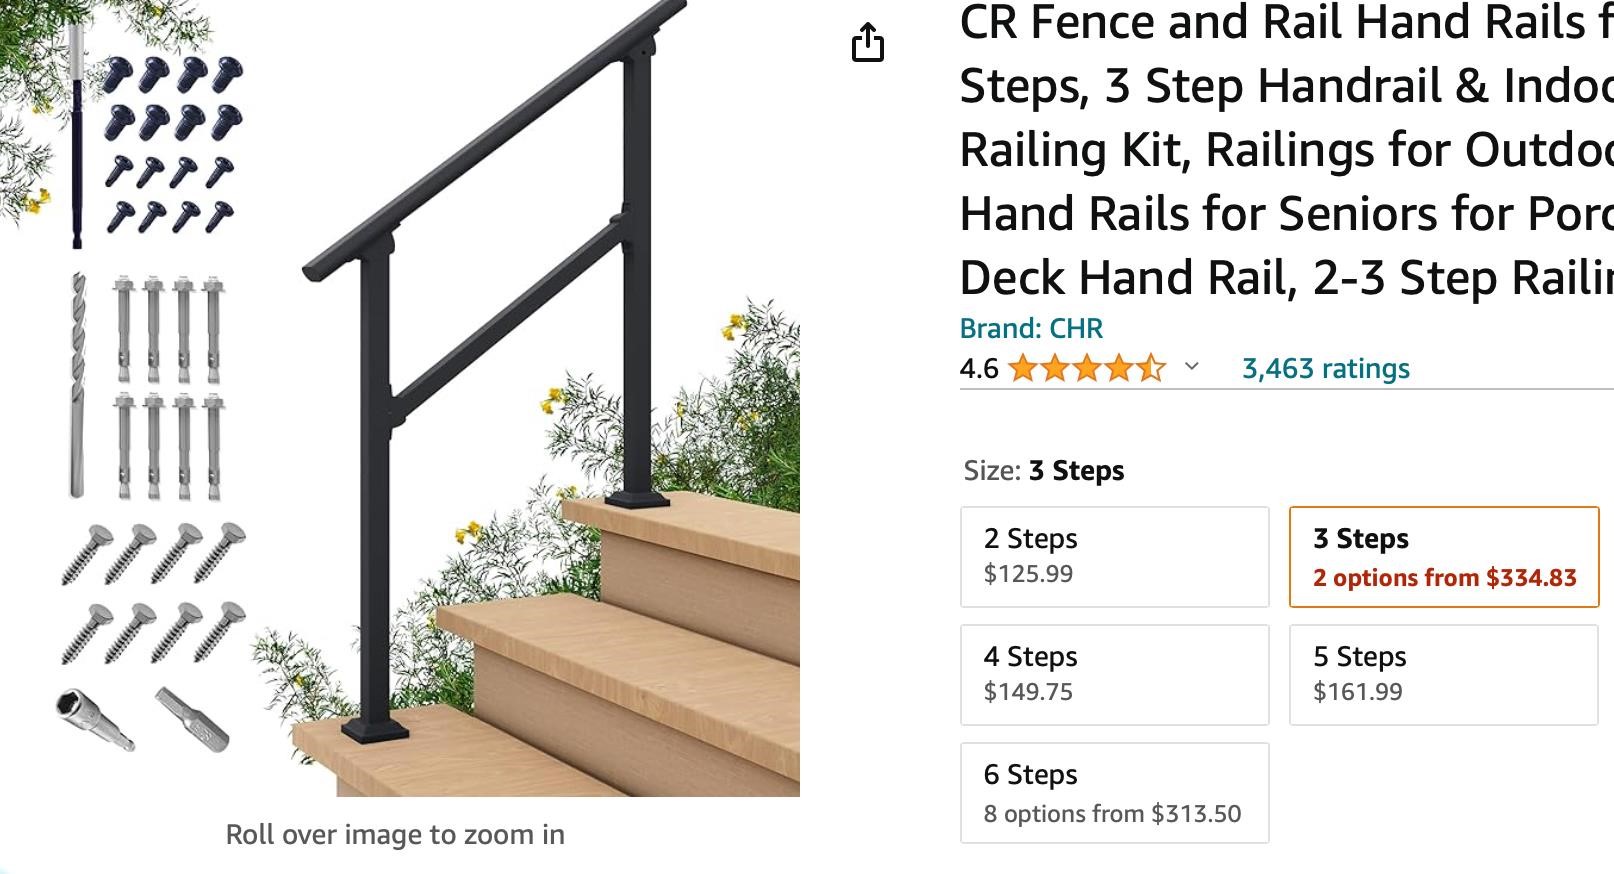 CR Fence and Rail Hand Rails for Outdoor, 3 Steps